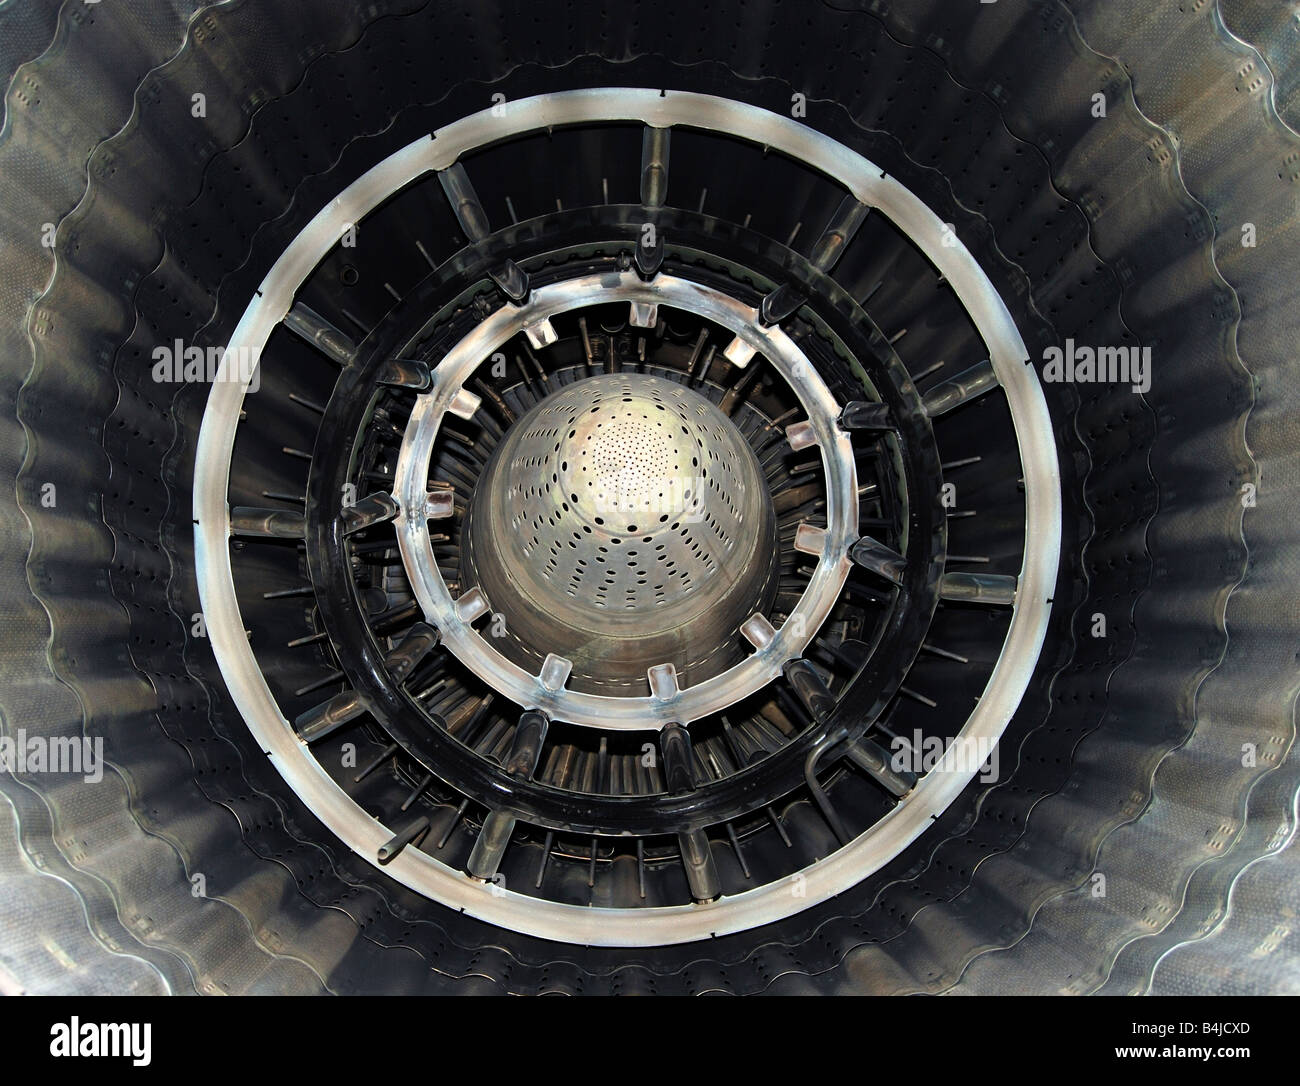 Turbine of military airplane from within, close up, metallic blades and circles, shining symmetric patterns Stock Photo